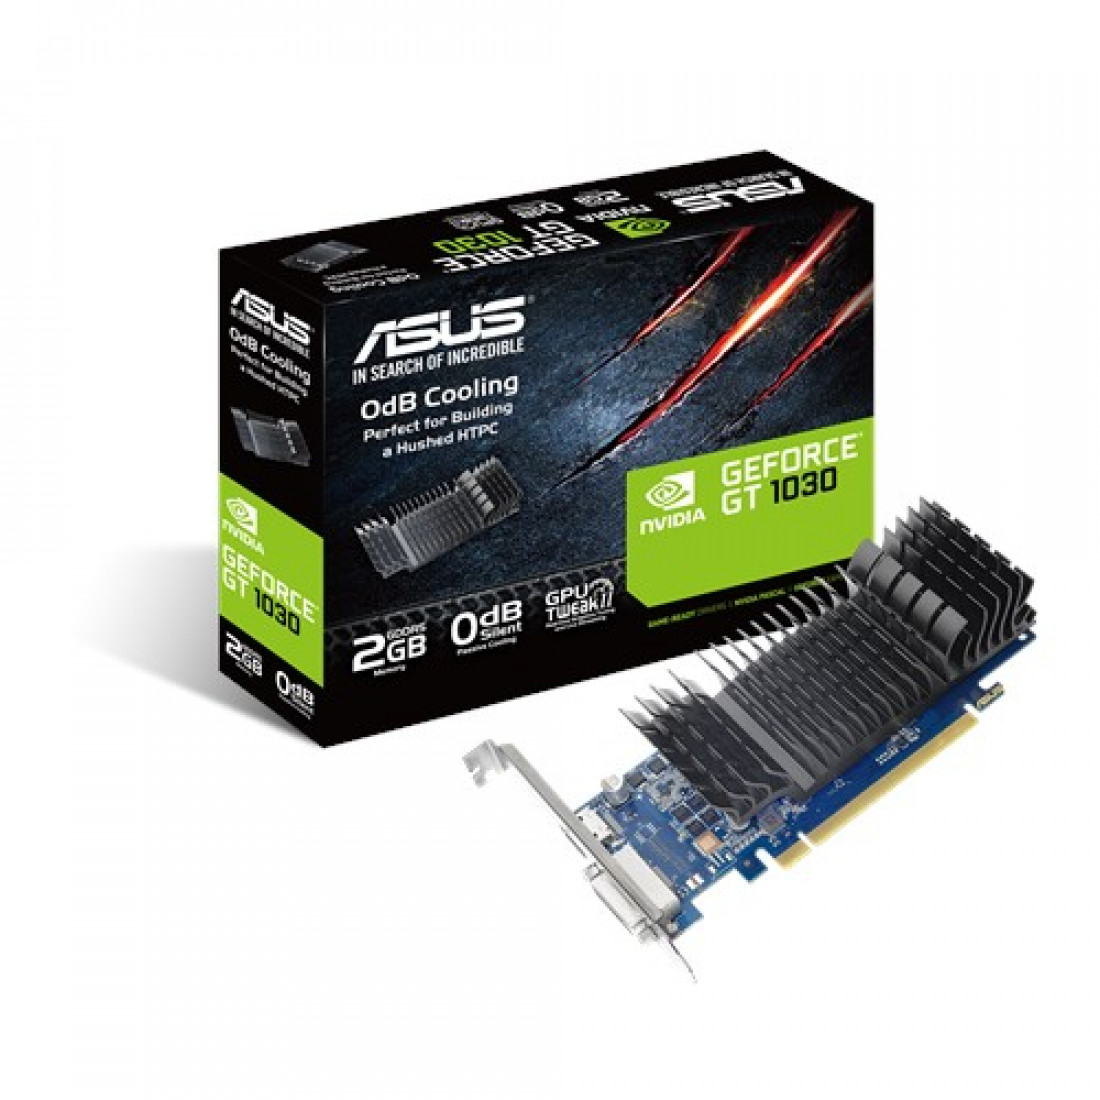 asus-geforce-gt-1030-2gb-gddr5-low-profile-graphics-card-1100x1100